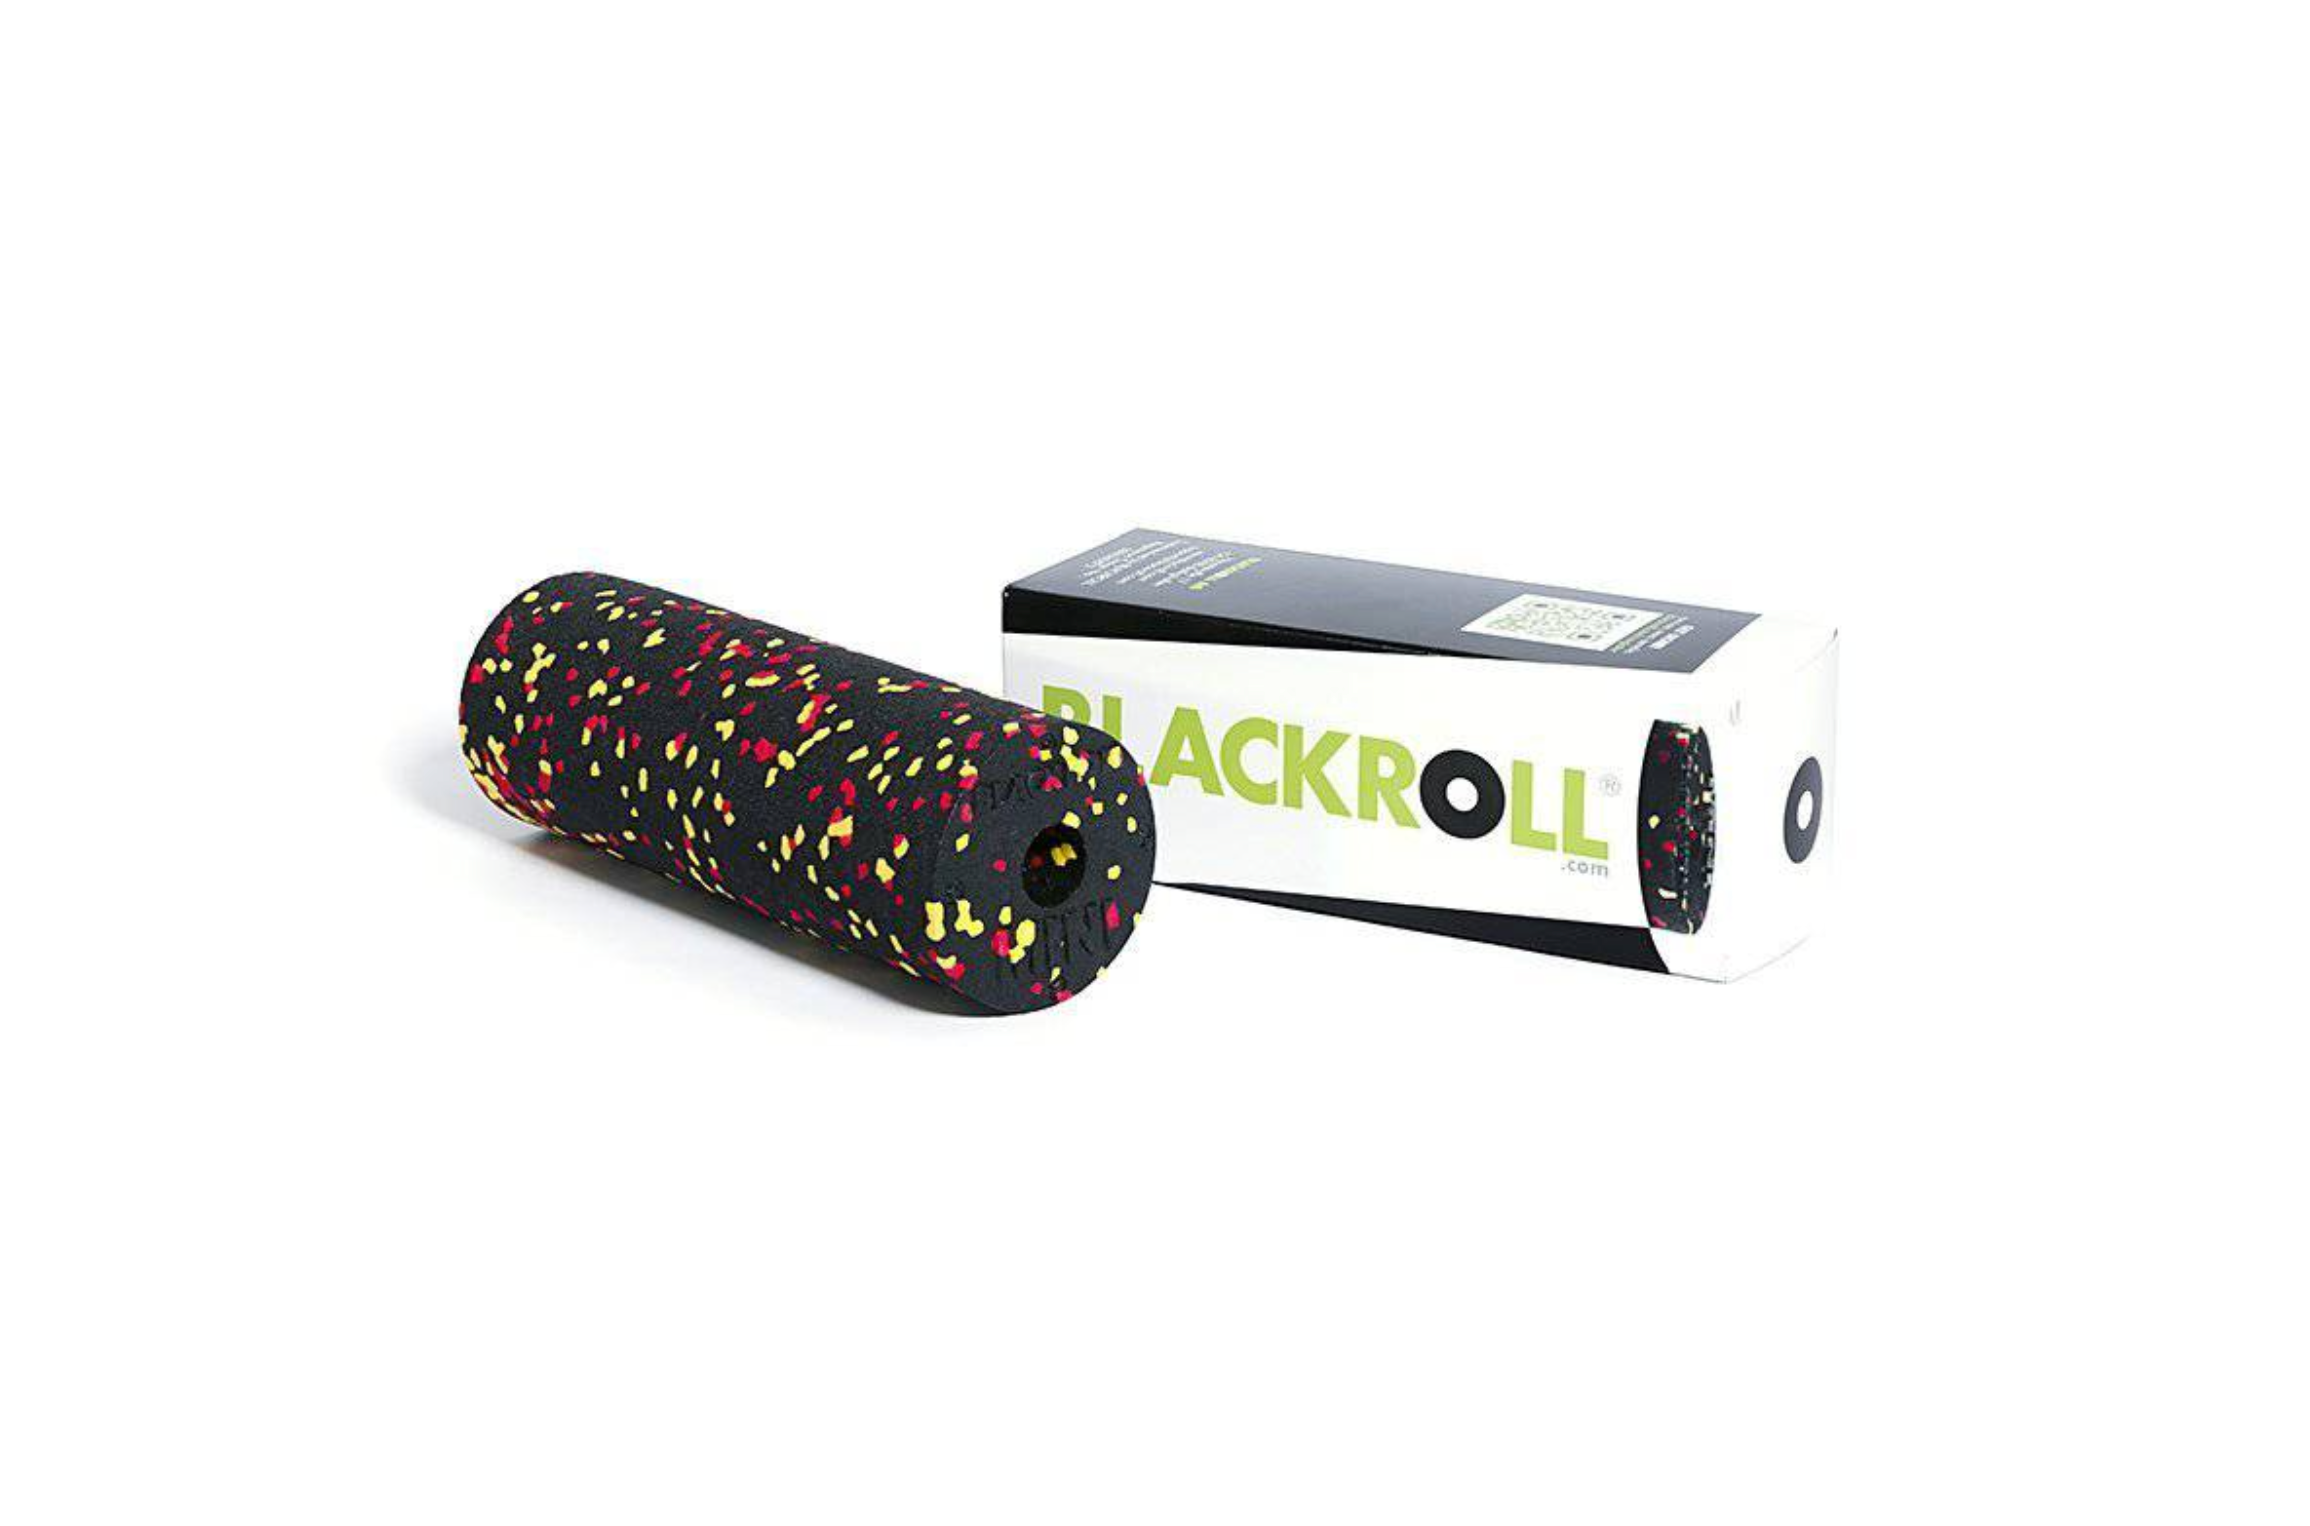 BLACKROLL - Mini Flow Foam Roller, Compact and Massage Tool for Feet, Hands, and Arms, Ideal for Travel and Plantar Fasciitis Relief, Perfect for Exercise, Massage, and Muscle Recovery, 6